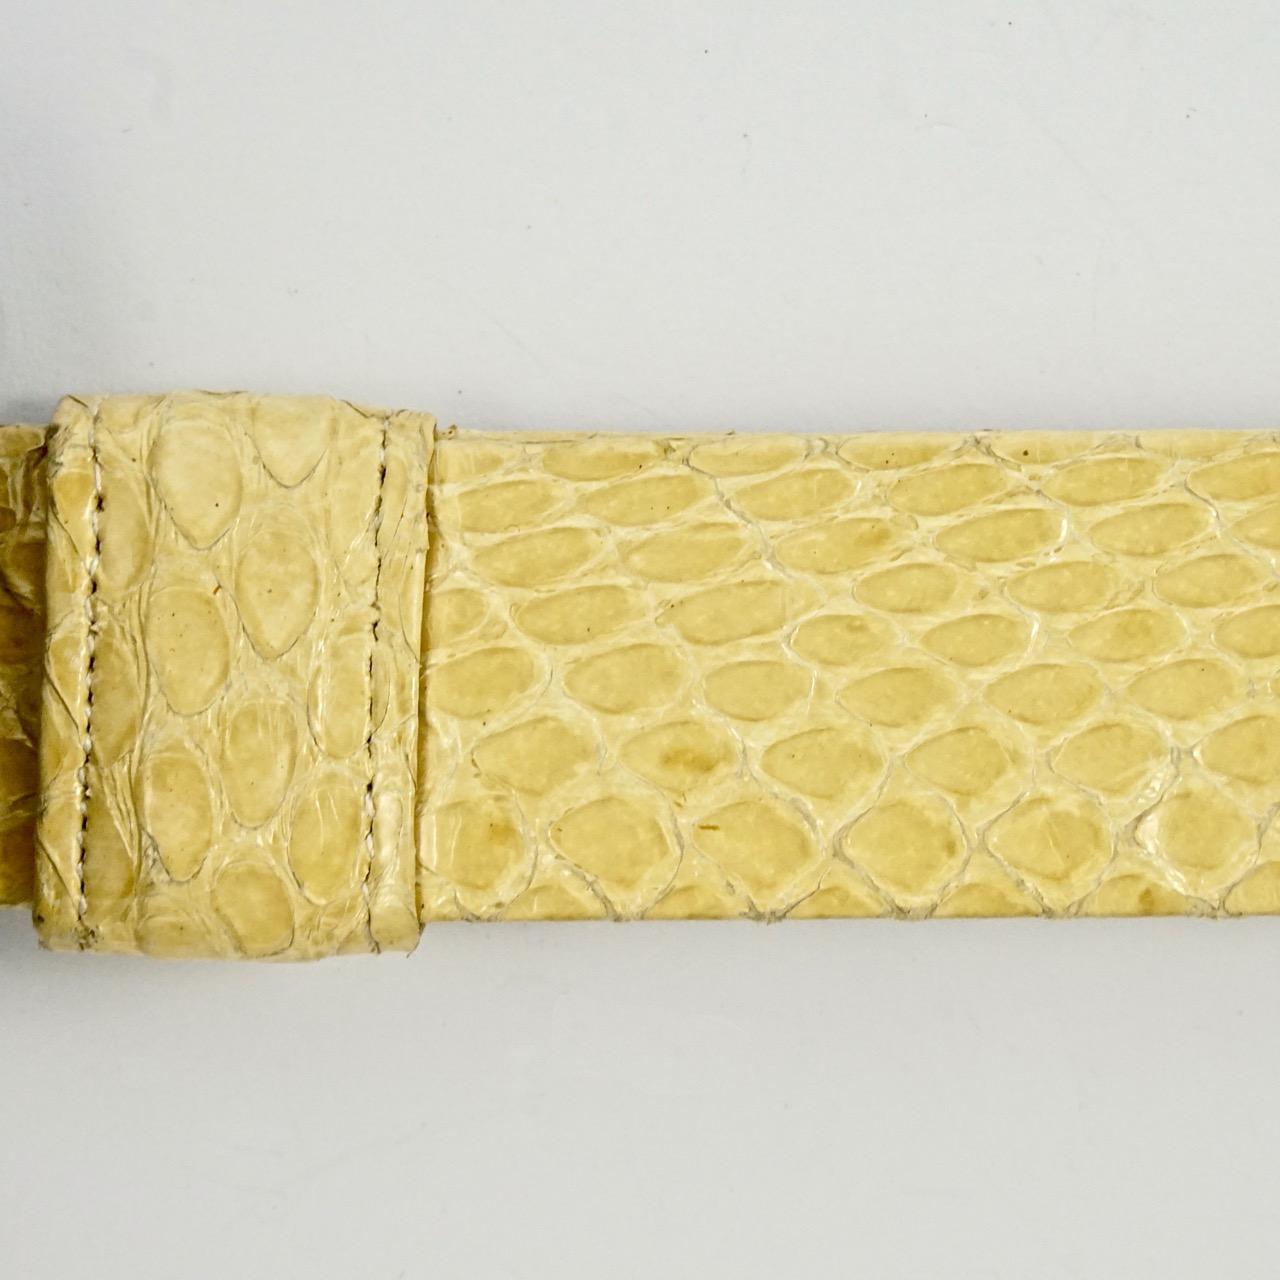 Beige Alexis Kirk Cream Yellow Snakeskin Belt with Gold Plated Silver Plated Buckle